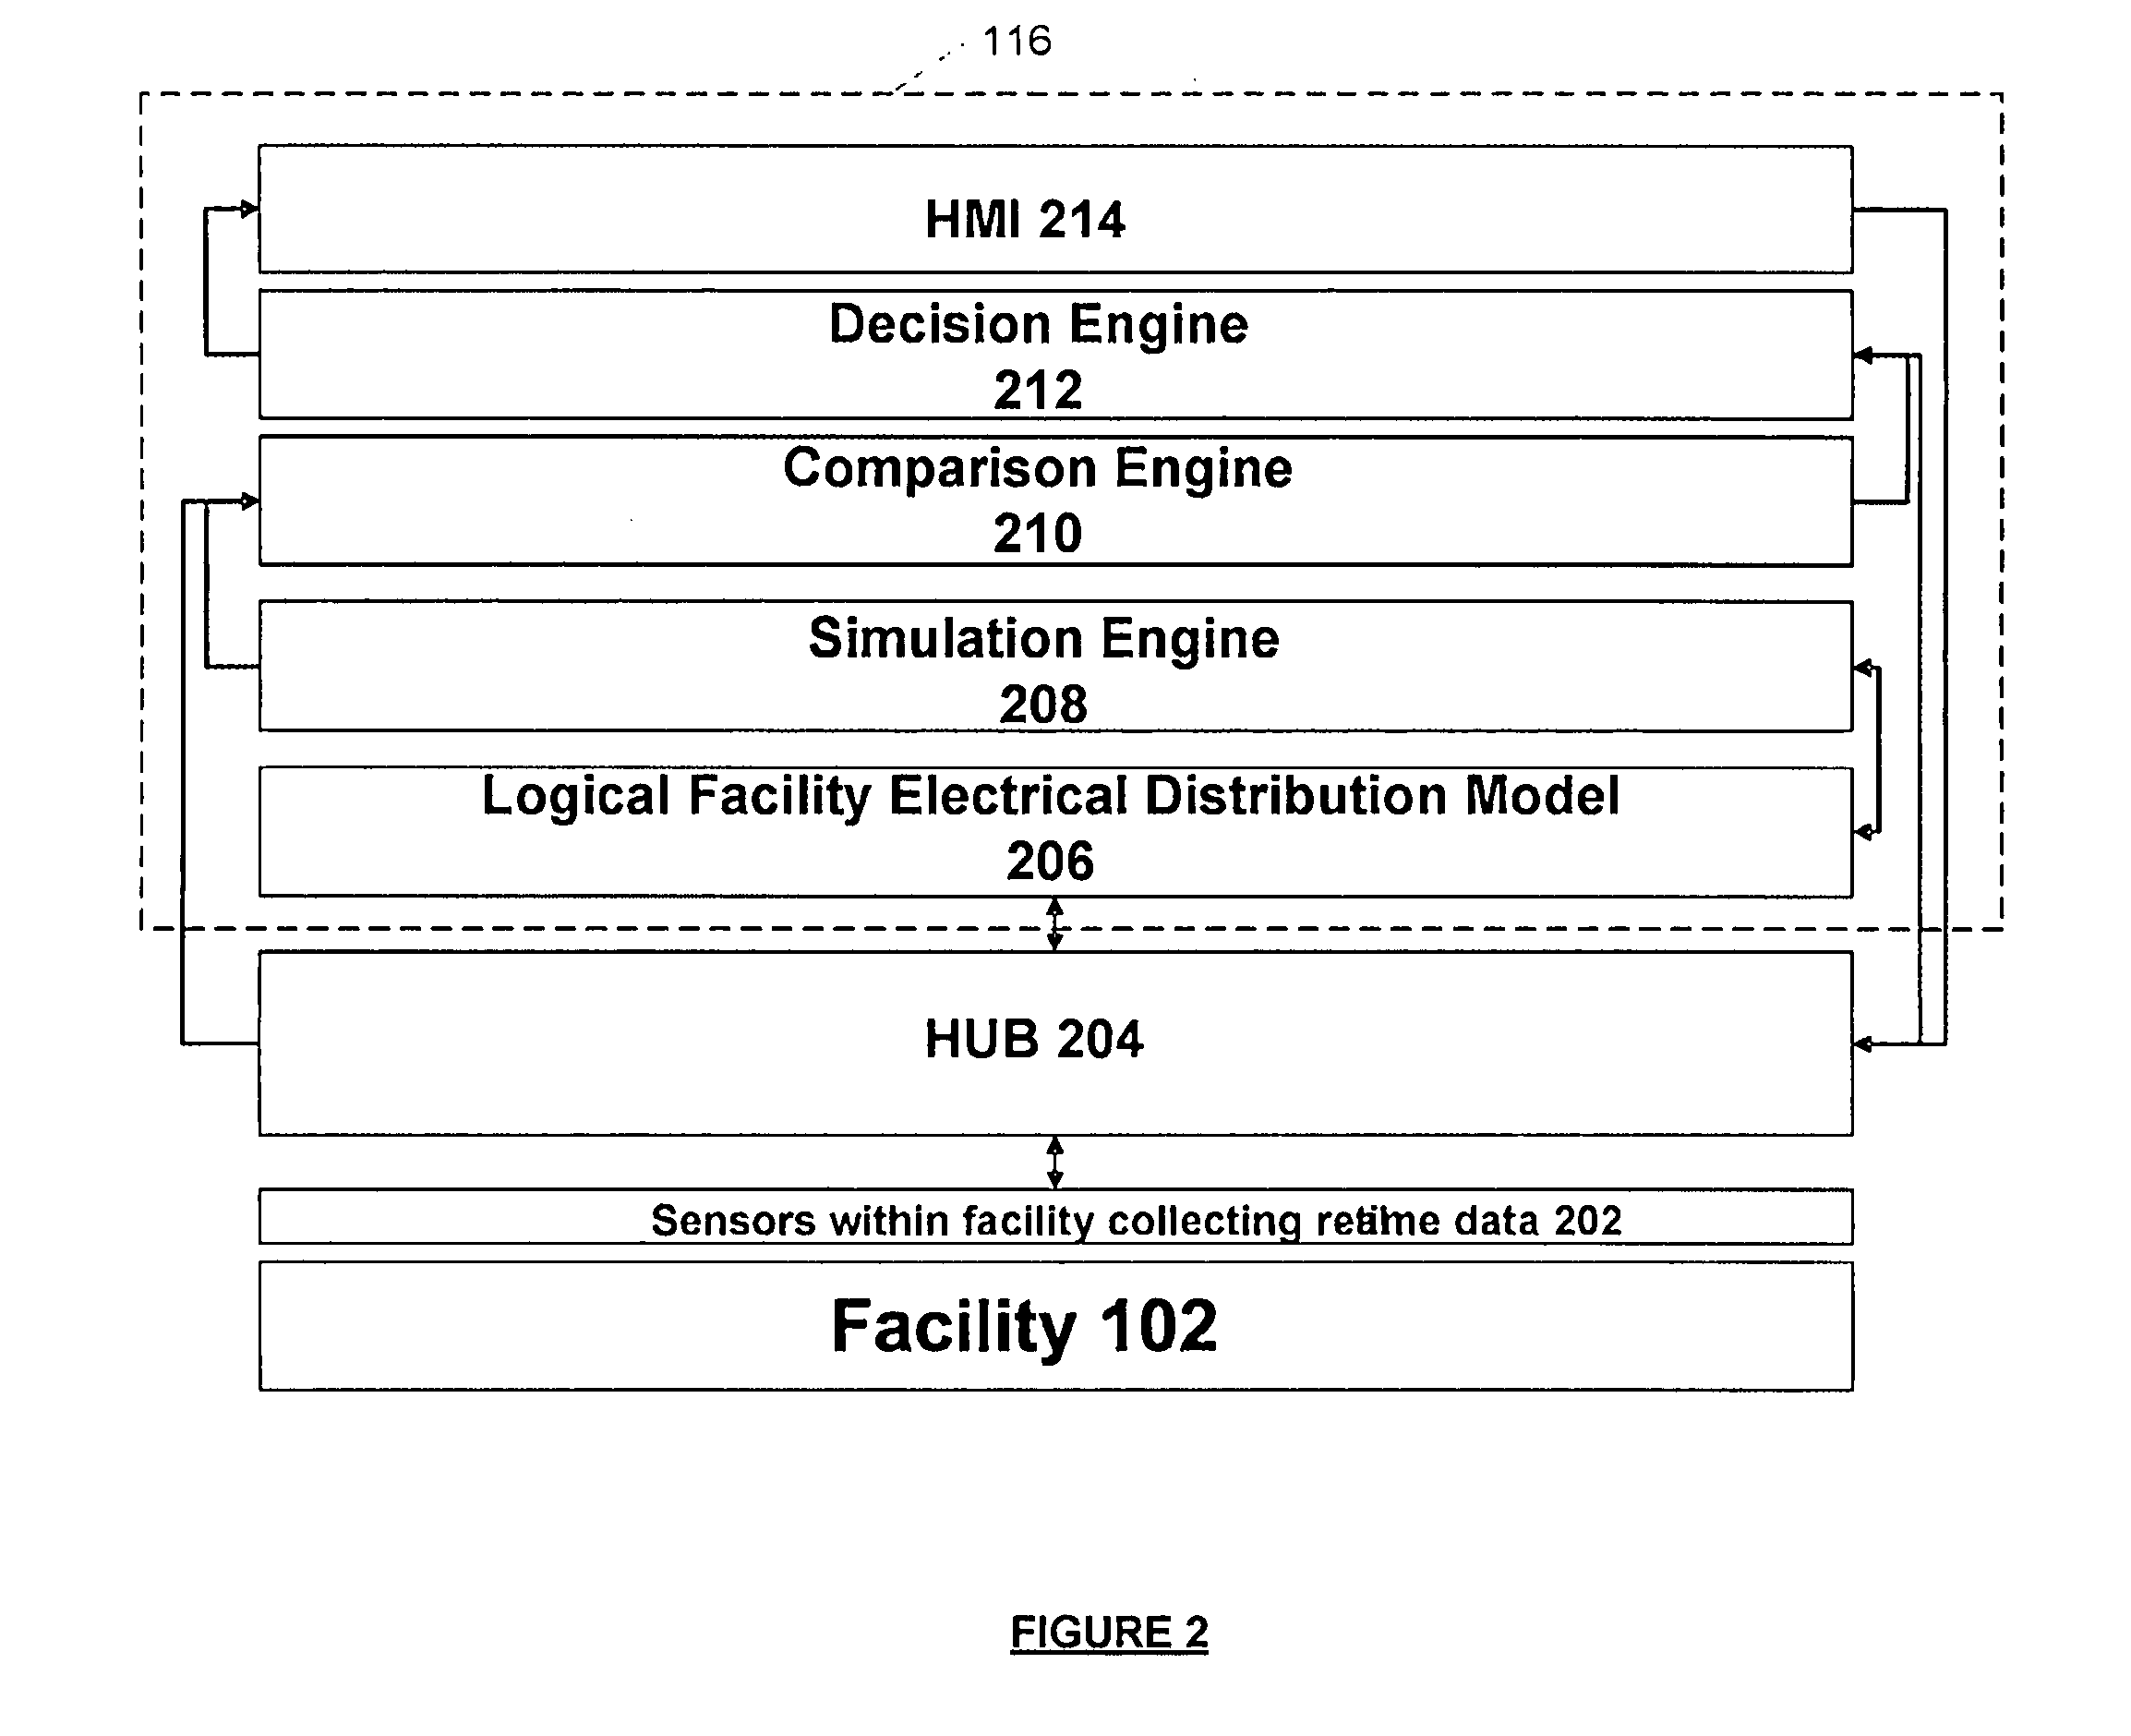 Systems and methods for automatic real-time capacity assessment for use in real-time power analytics of an electrical power distribution system